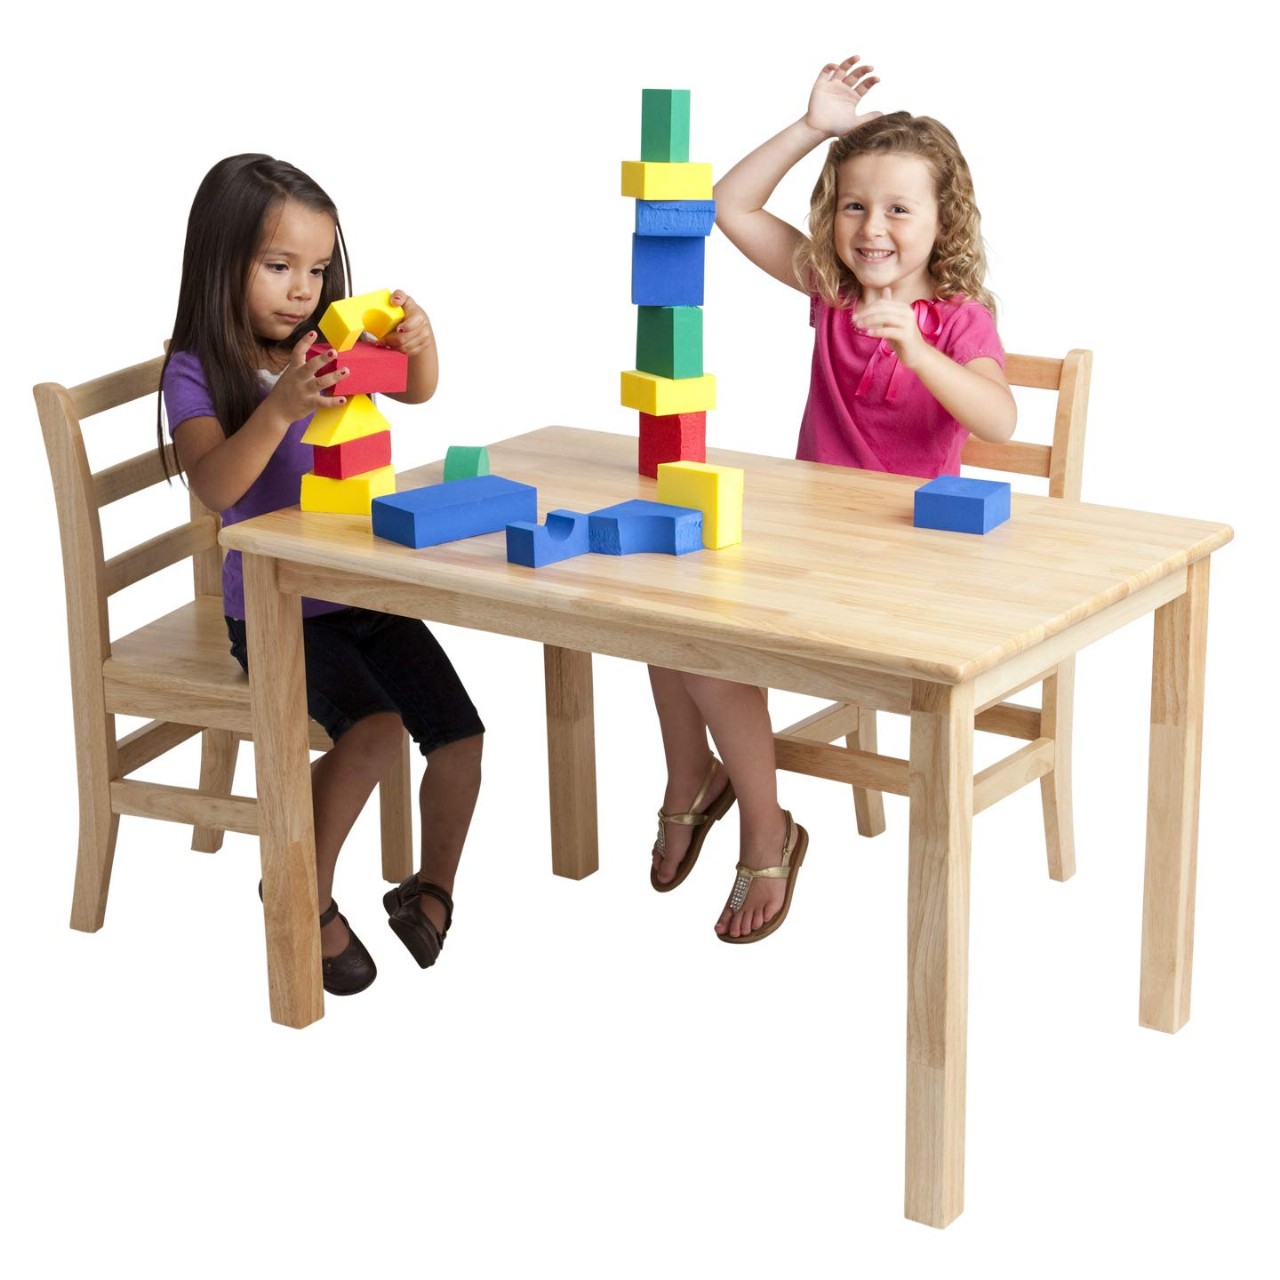 Hardwood Kids Table and Chair Set - 24 x 36 Inch Rectangle Table with 2 Ladderback Chairs - Children